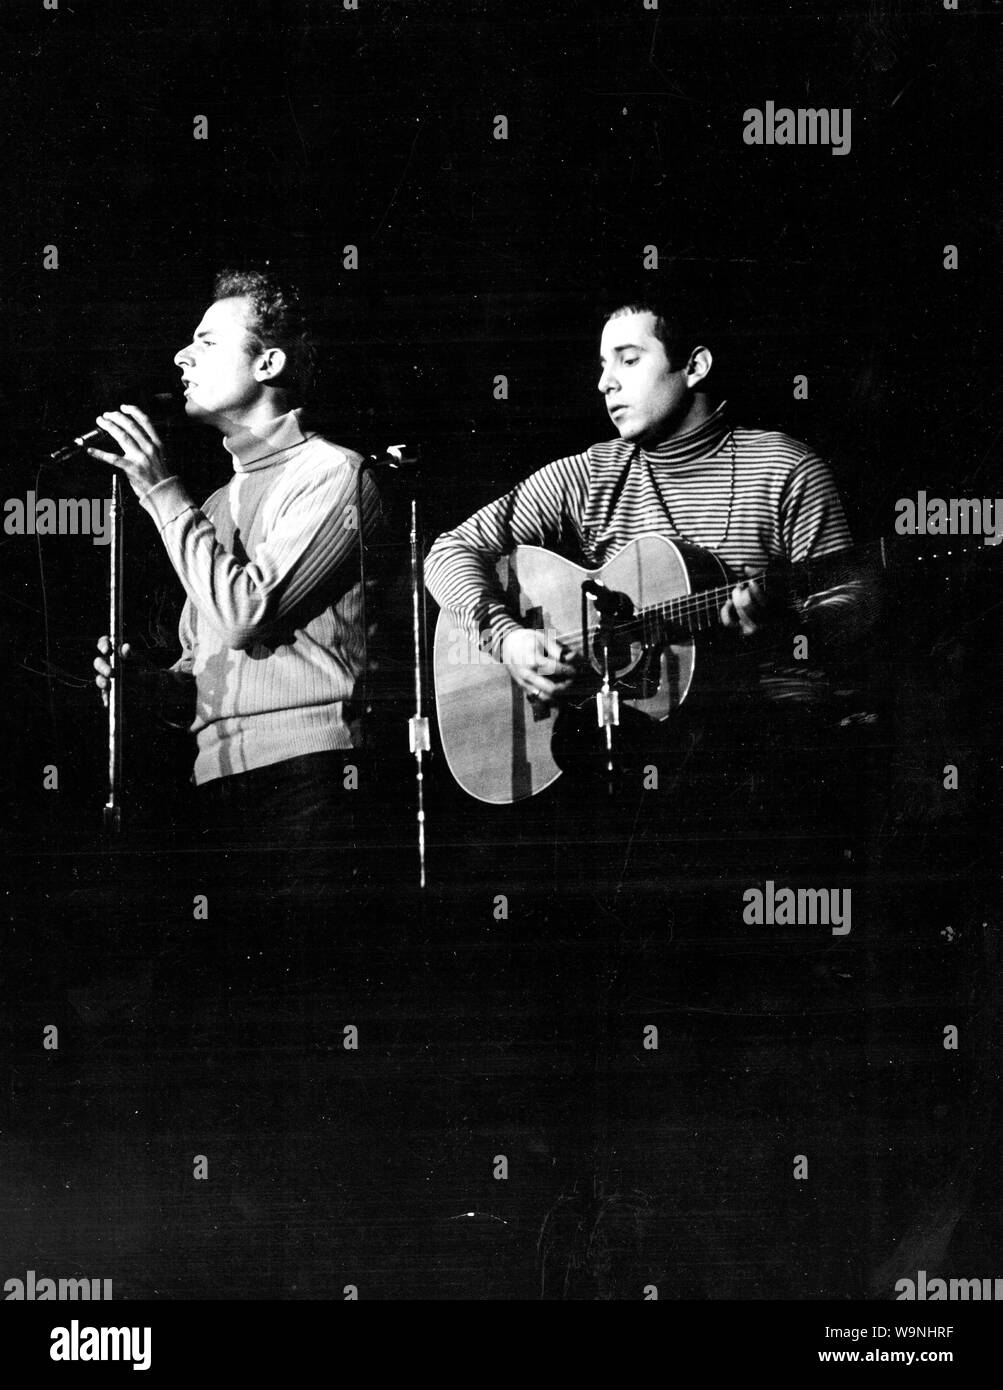 August 14, 1967, Los Angeles, California, USA: Simon and Garfunkel in 1967. Simon & Garfunkel is an American duo consisting of singer-songwriter PAUL SIMON and singer ART GARFUNKEL. The duo rose to fame in 1965, backed by the hit single ''The Sound of Silence''. Their music was featured in the landmark film The Graduate, propelling them further into the public consciousness. (Credit Image: © Globe Photos via ZUMA Wire) Stock Photo